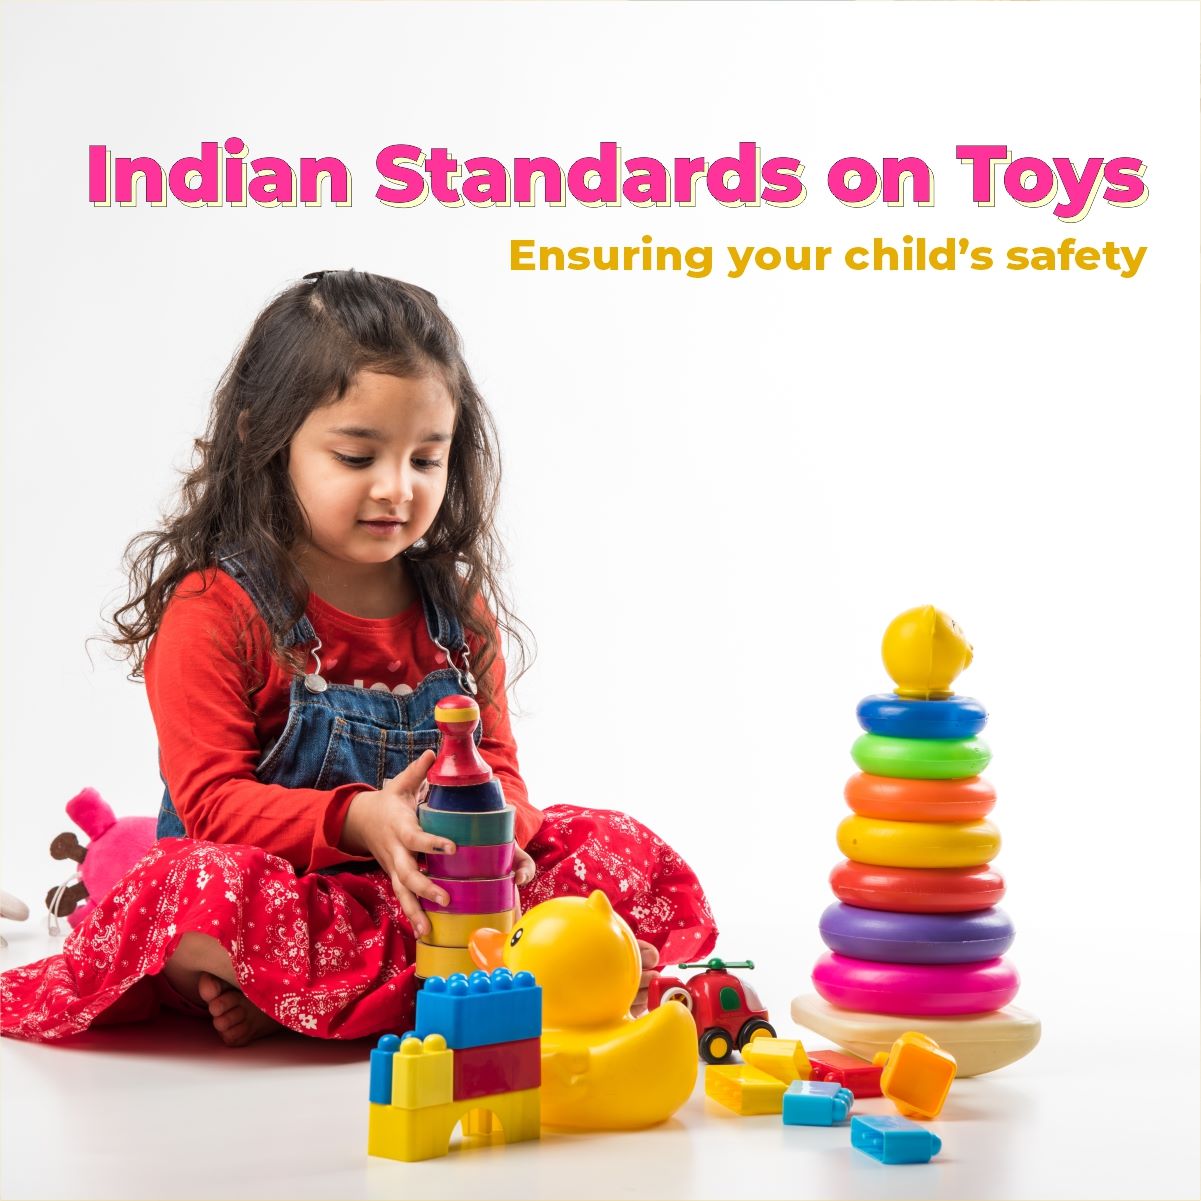 ISO - Playing safe with kids' toys